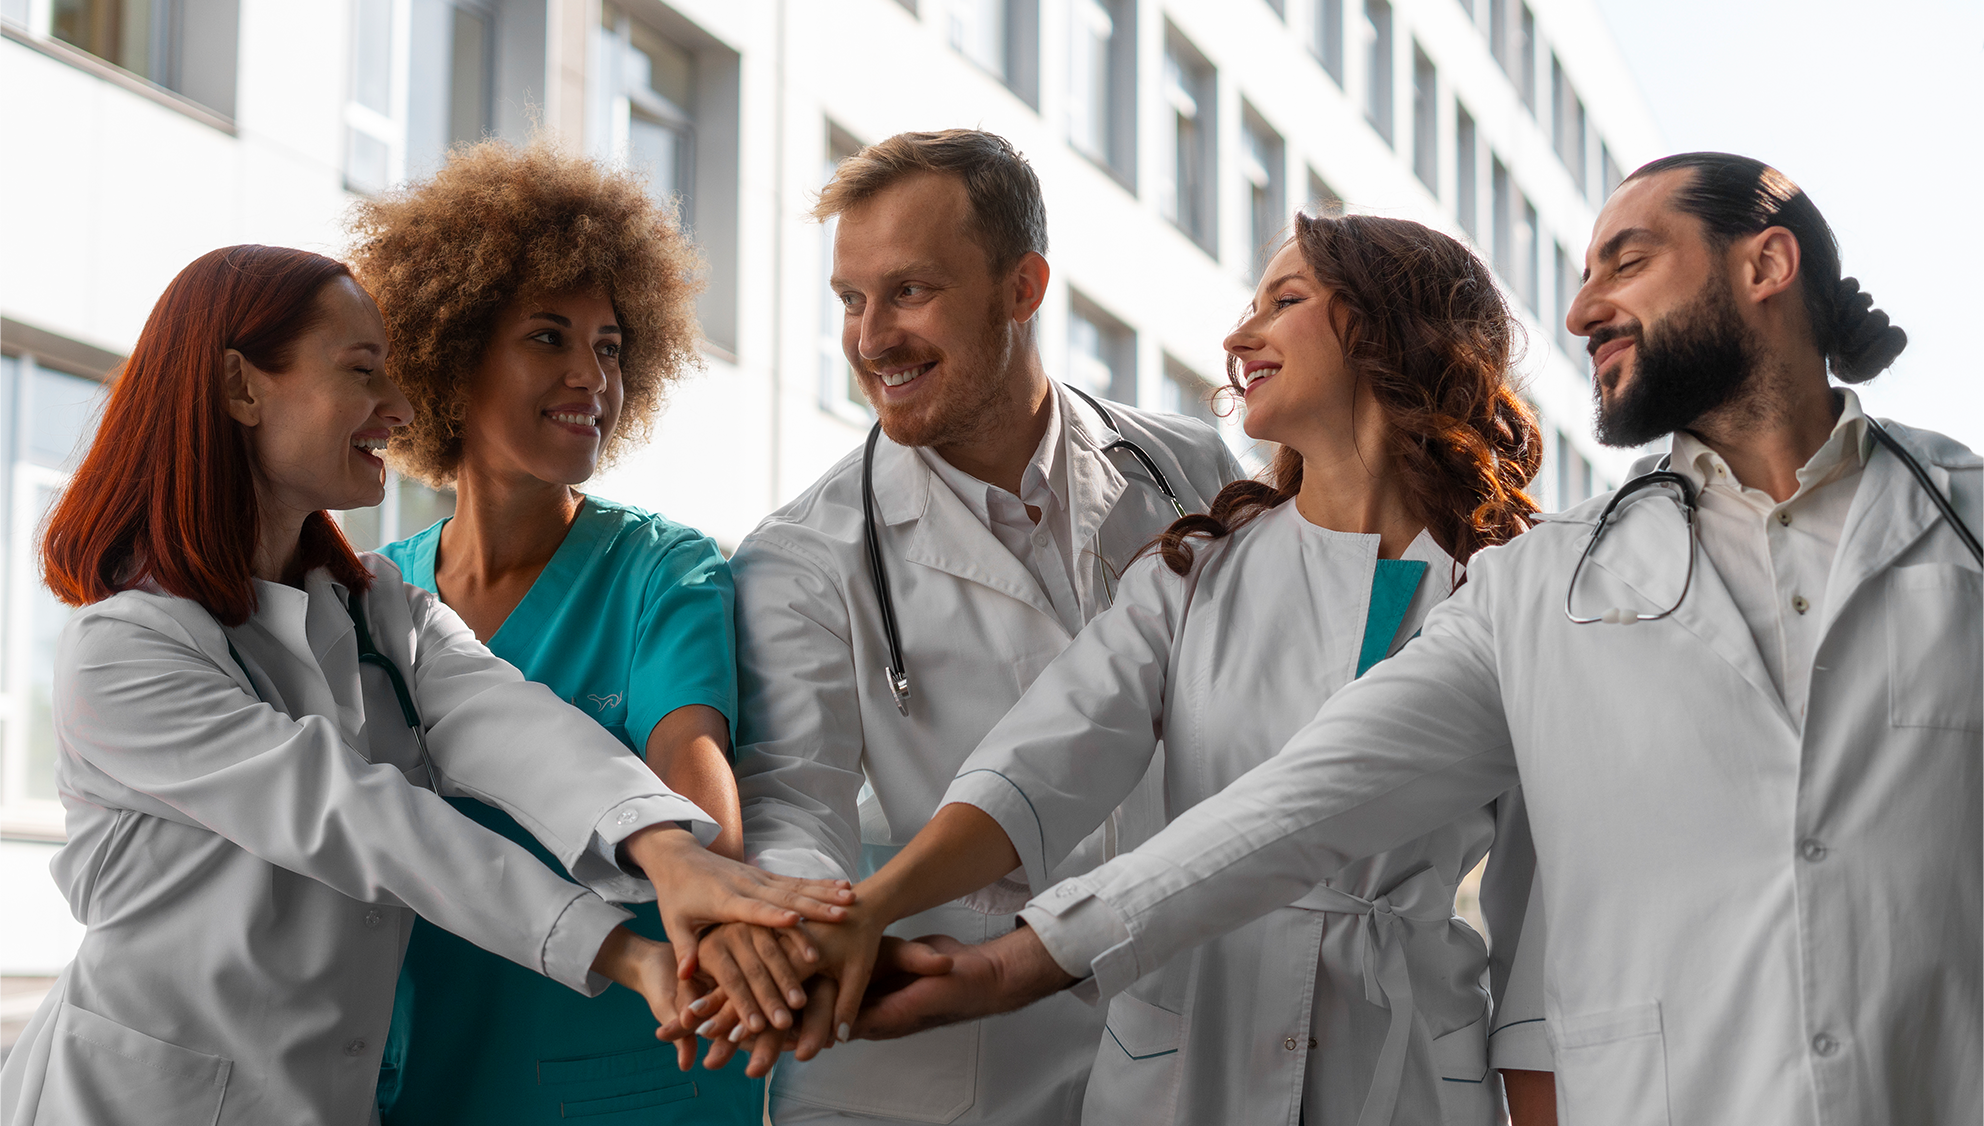 Nurse Networking: Connections that Boost Your Career